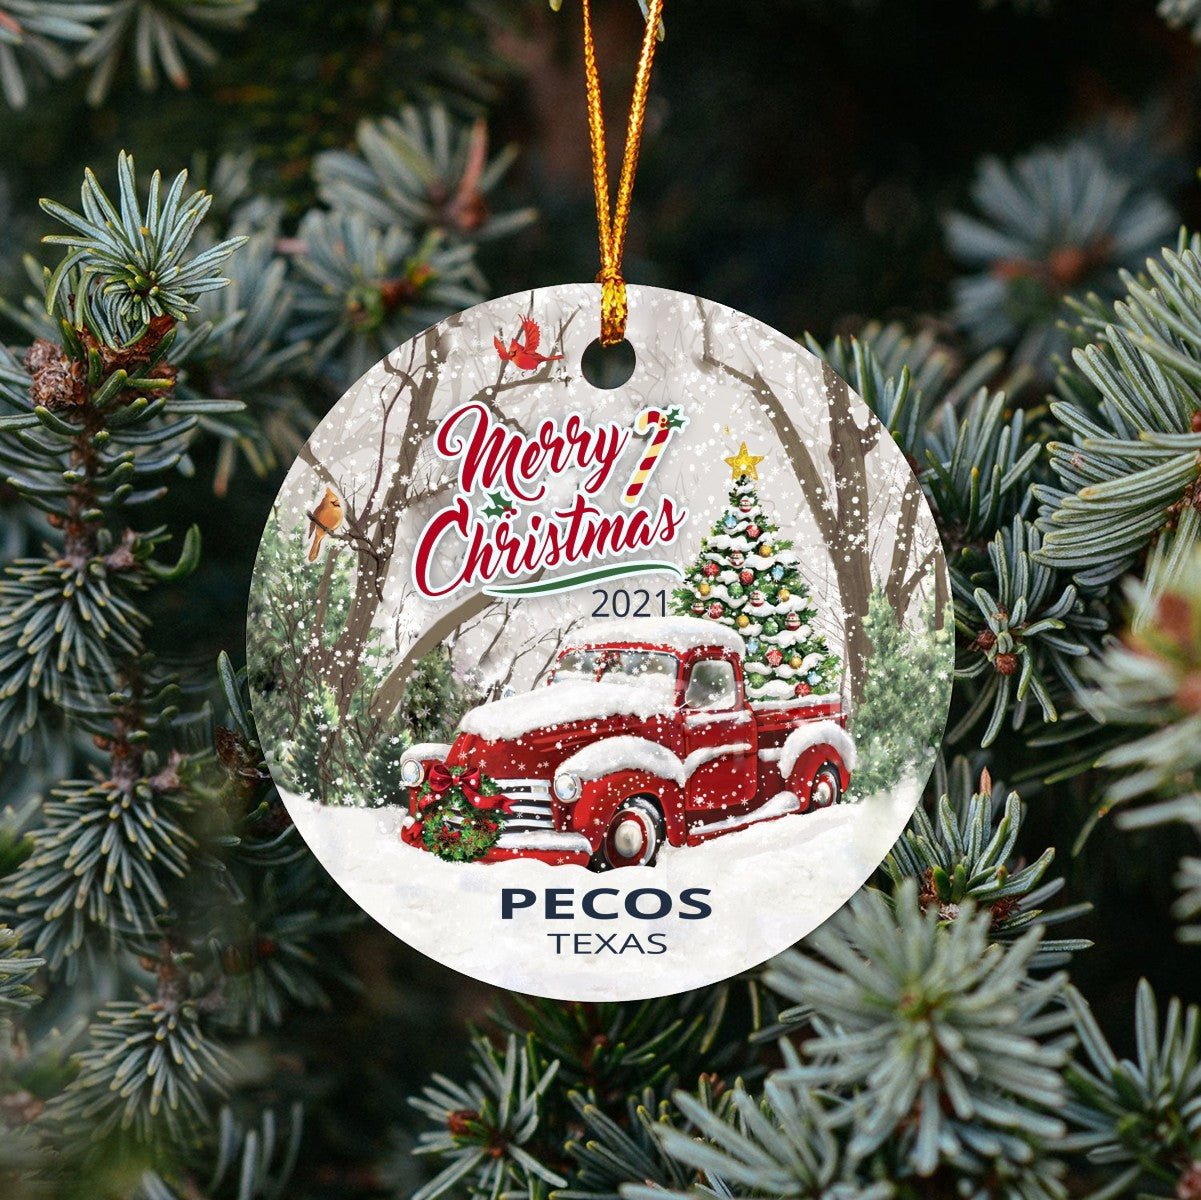 Christmas Tree Ornaments Pecos - Ornament With Name City, State Pecos Texas TX Ornament - Red Truck Xmas Ornaments 3'' Plastic Gift For Family, Friend And Housewarming